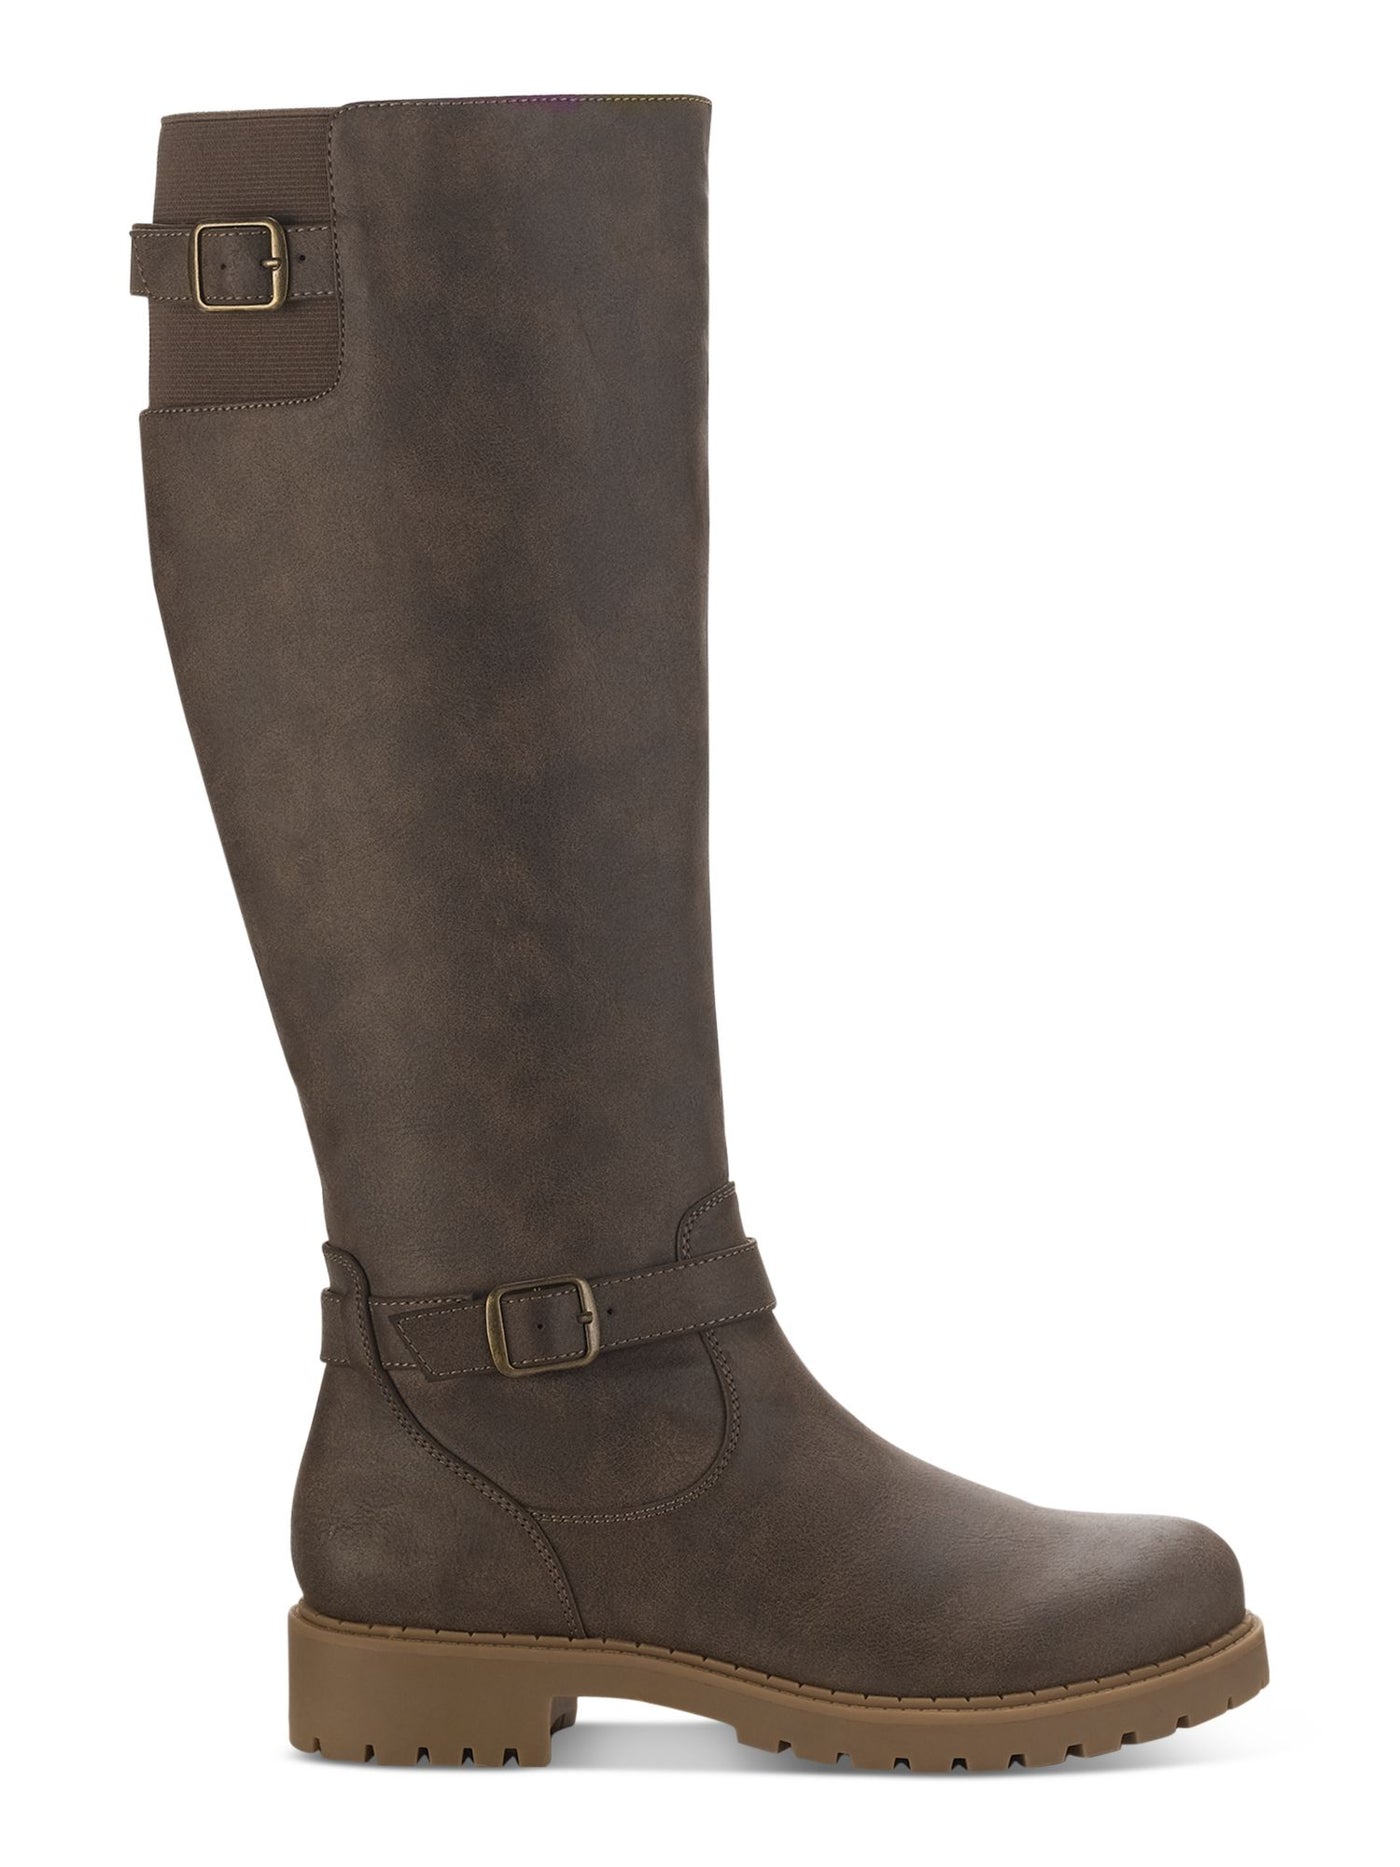 STYLE & COMPANY Womens Brown Cushioned Lug Sole Buckle Accent Goring Elenorr Round Toe Block Heel Zip-Up Riding Boot 8 M